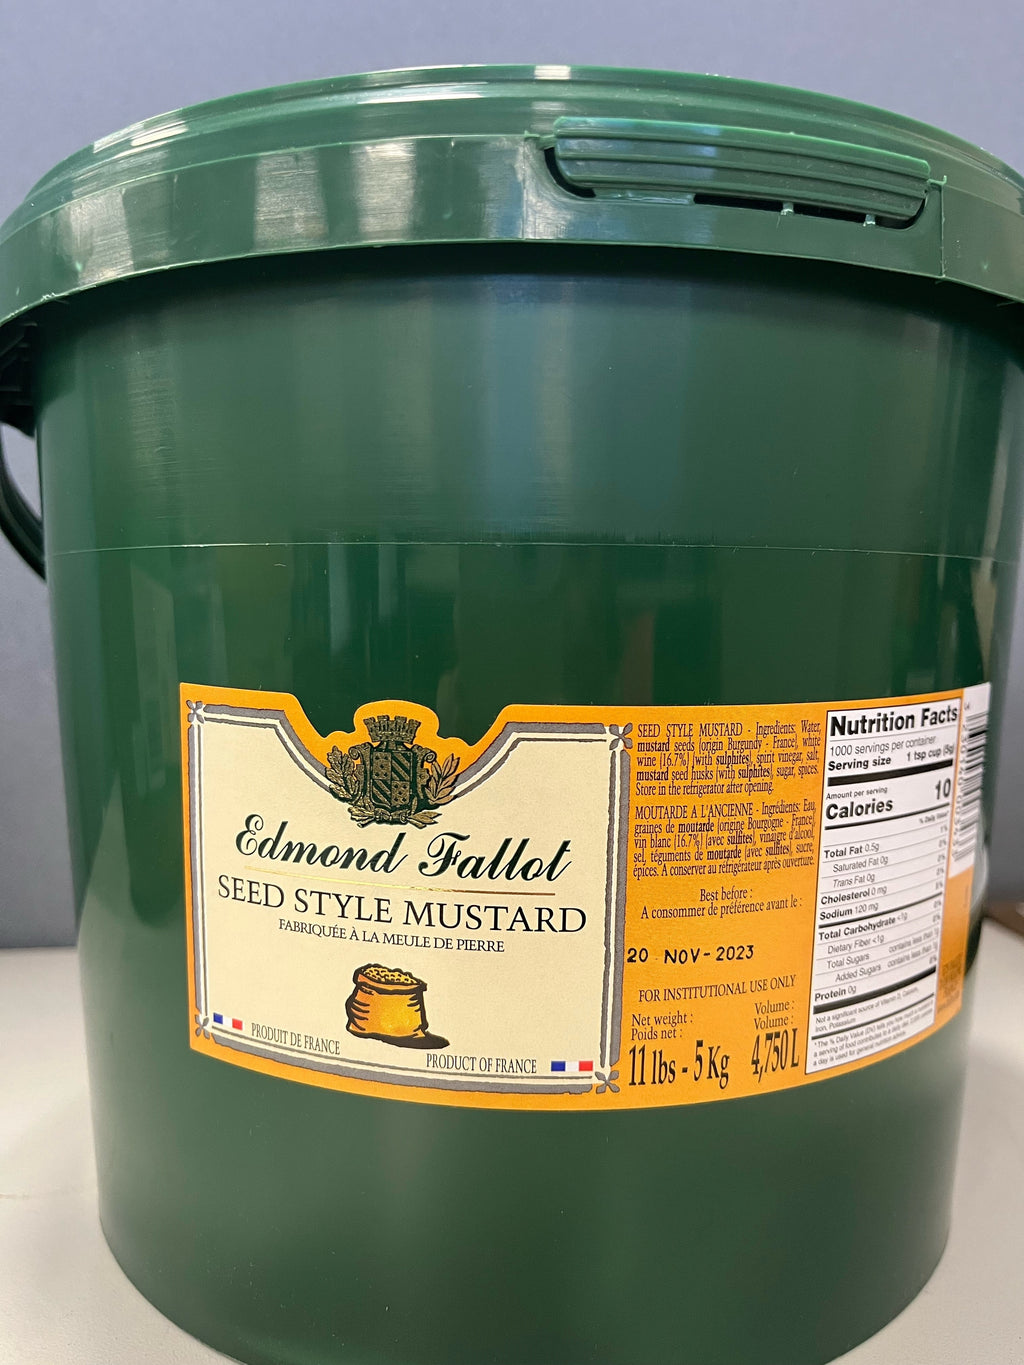 Seed Style French Mustard 5kg Tub Fallot (Green Tub/Label)